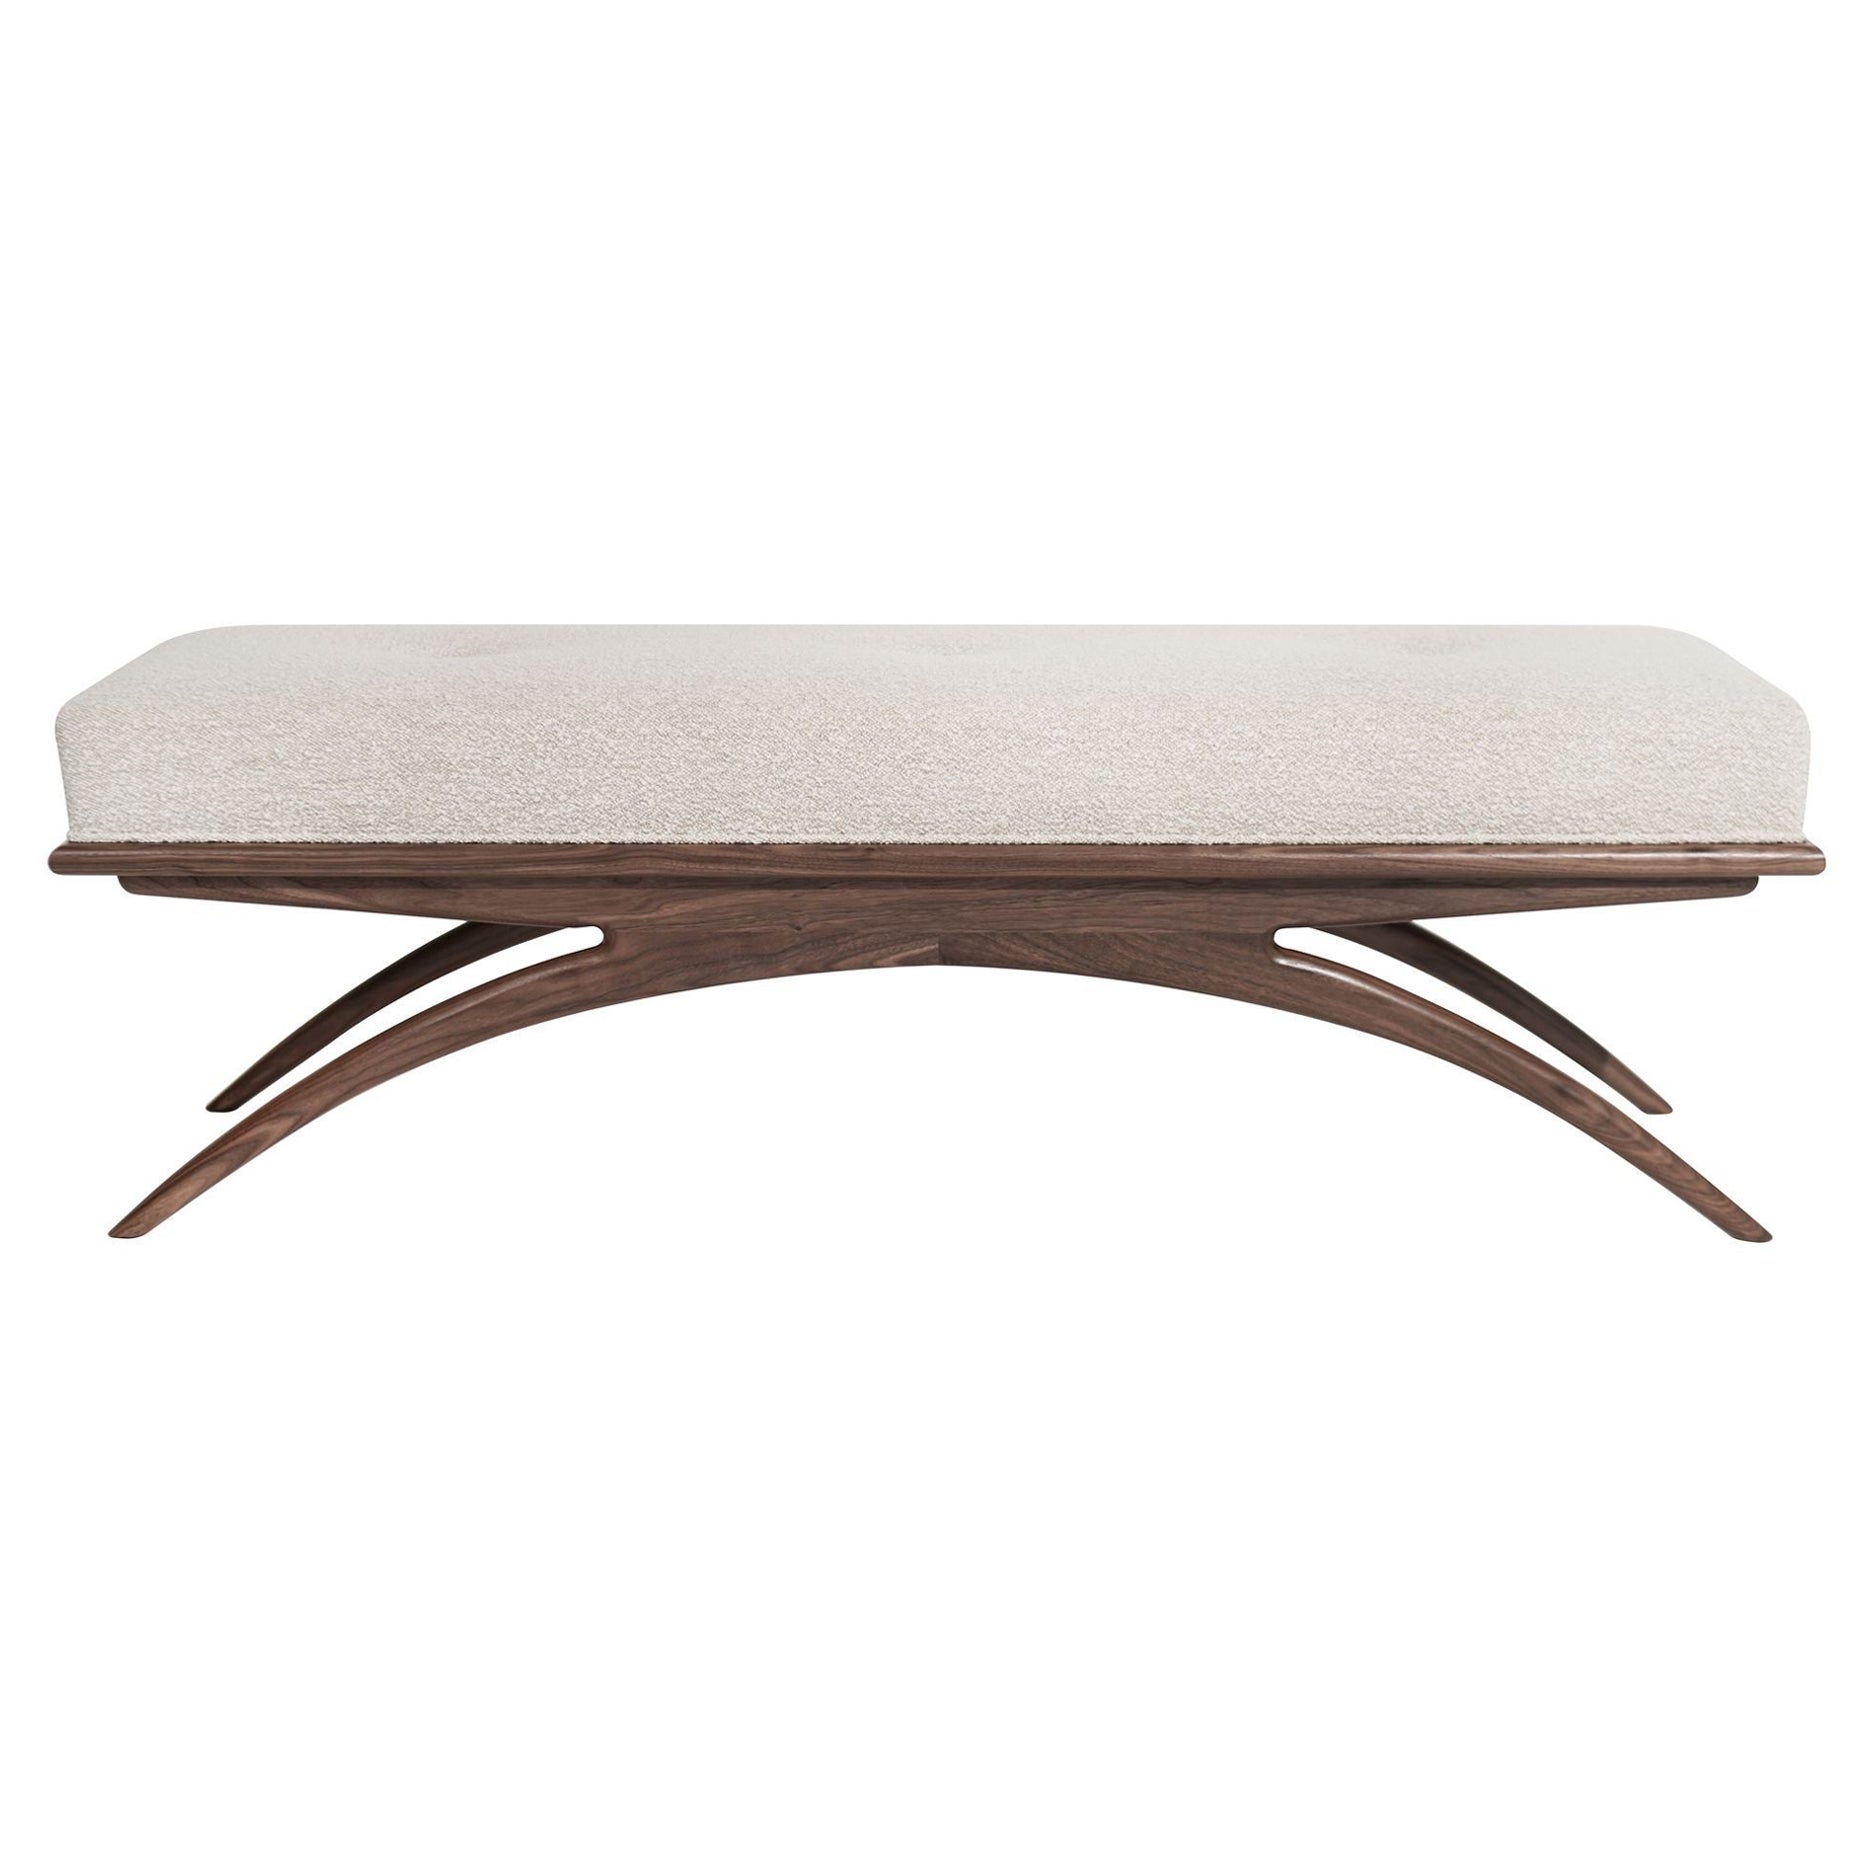 Convex Bench Series 60 in Natural Walnut